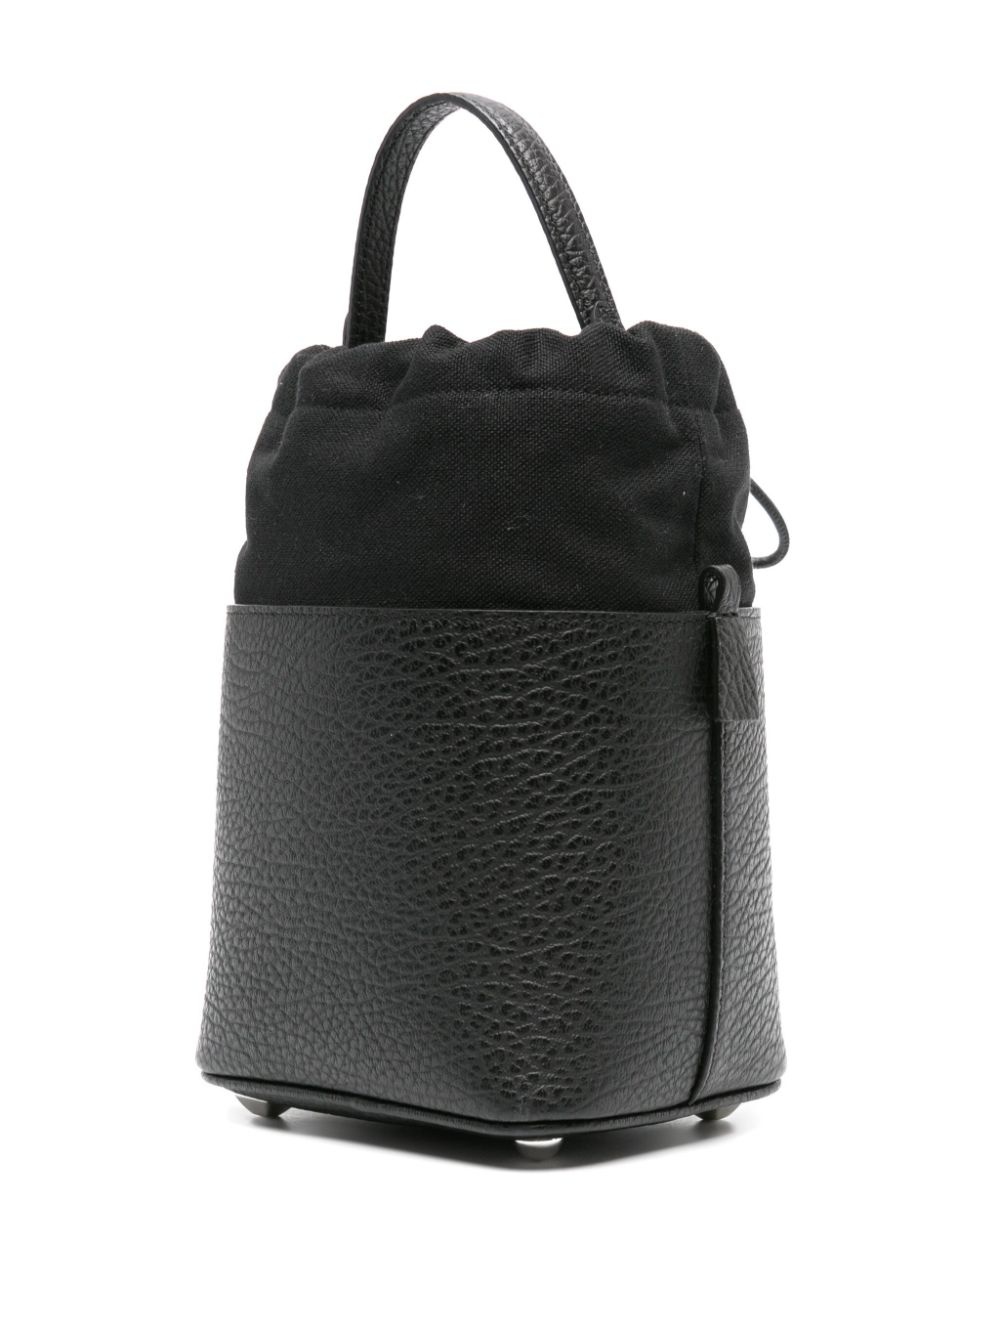 5ac small leather bucket bag - 4